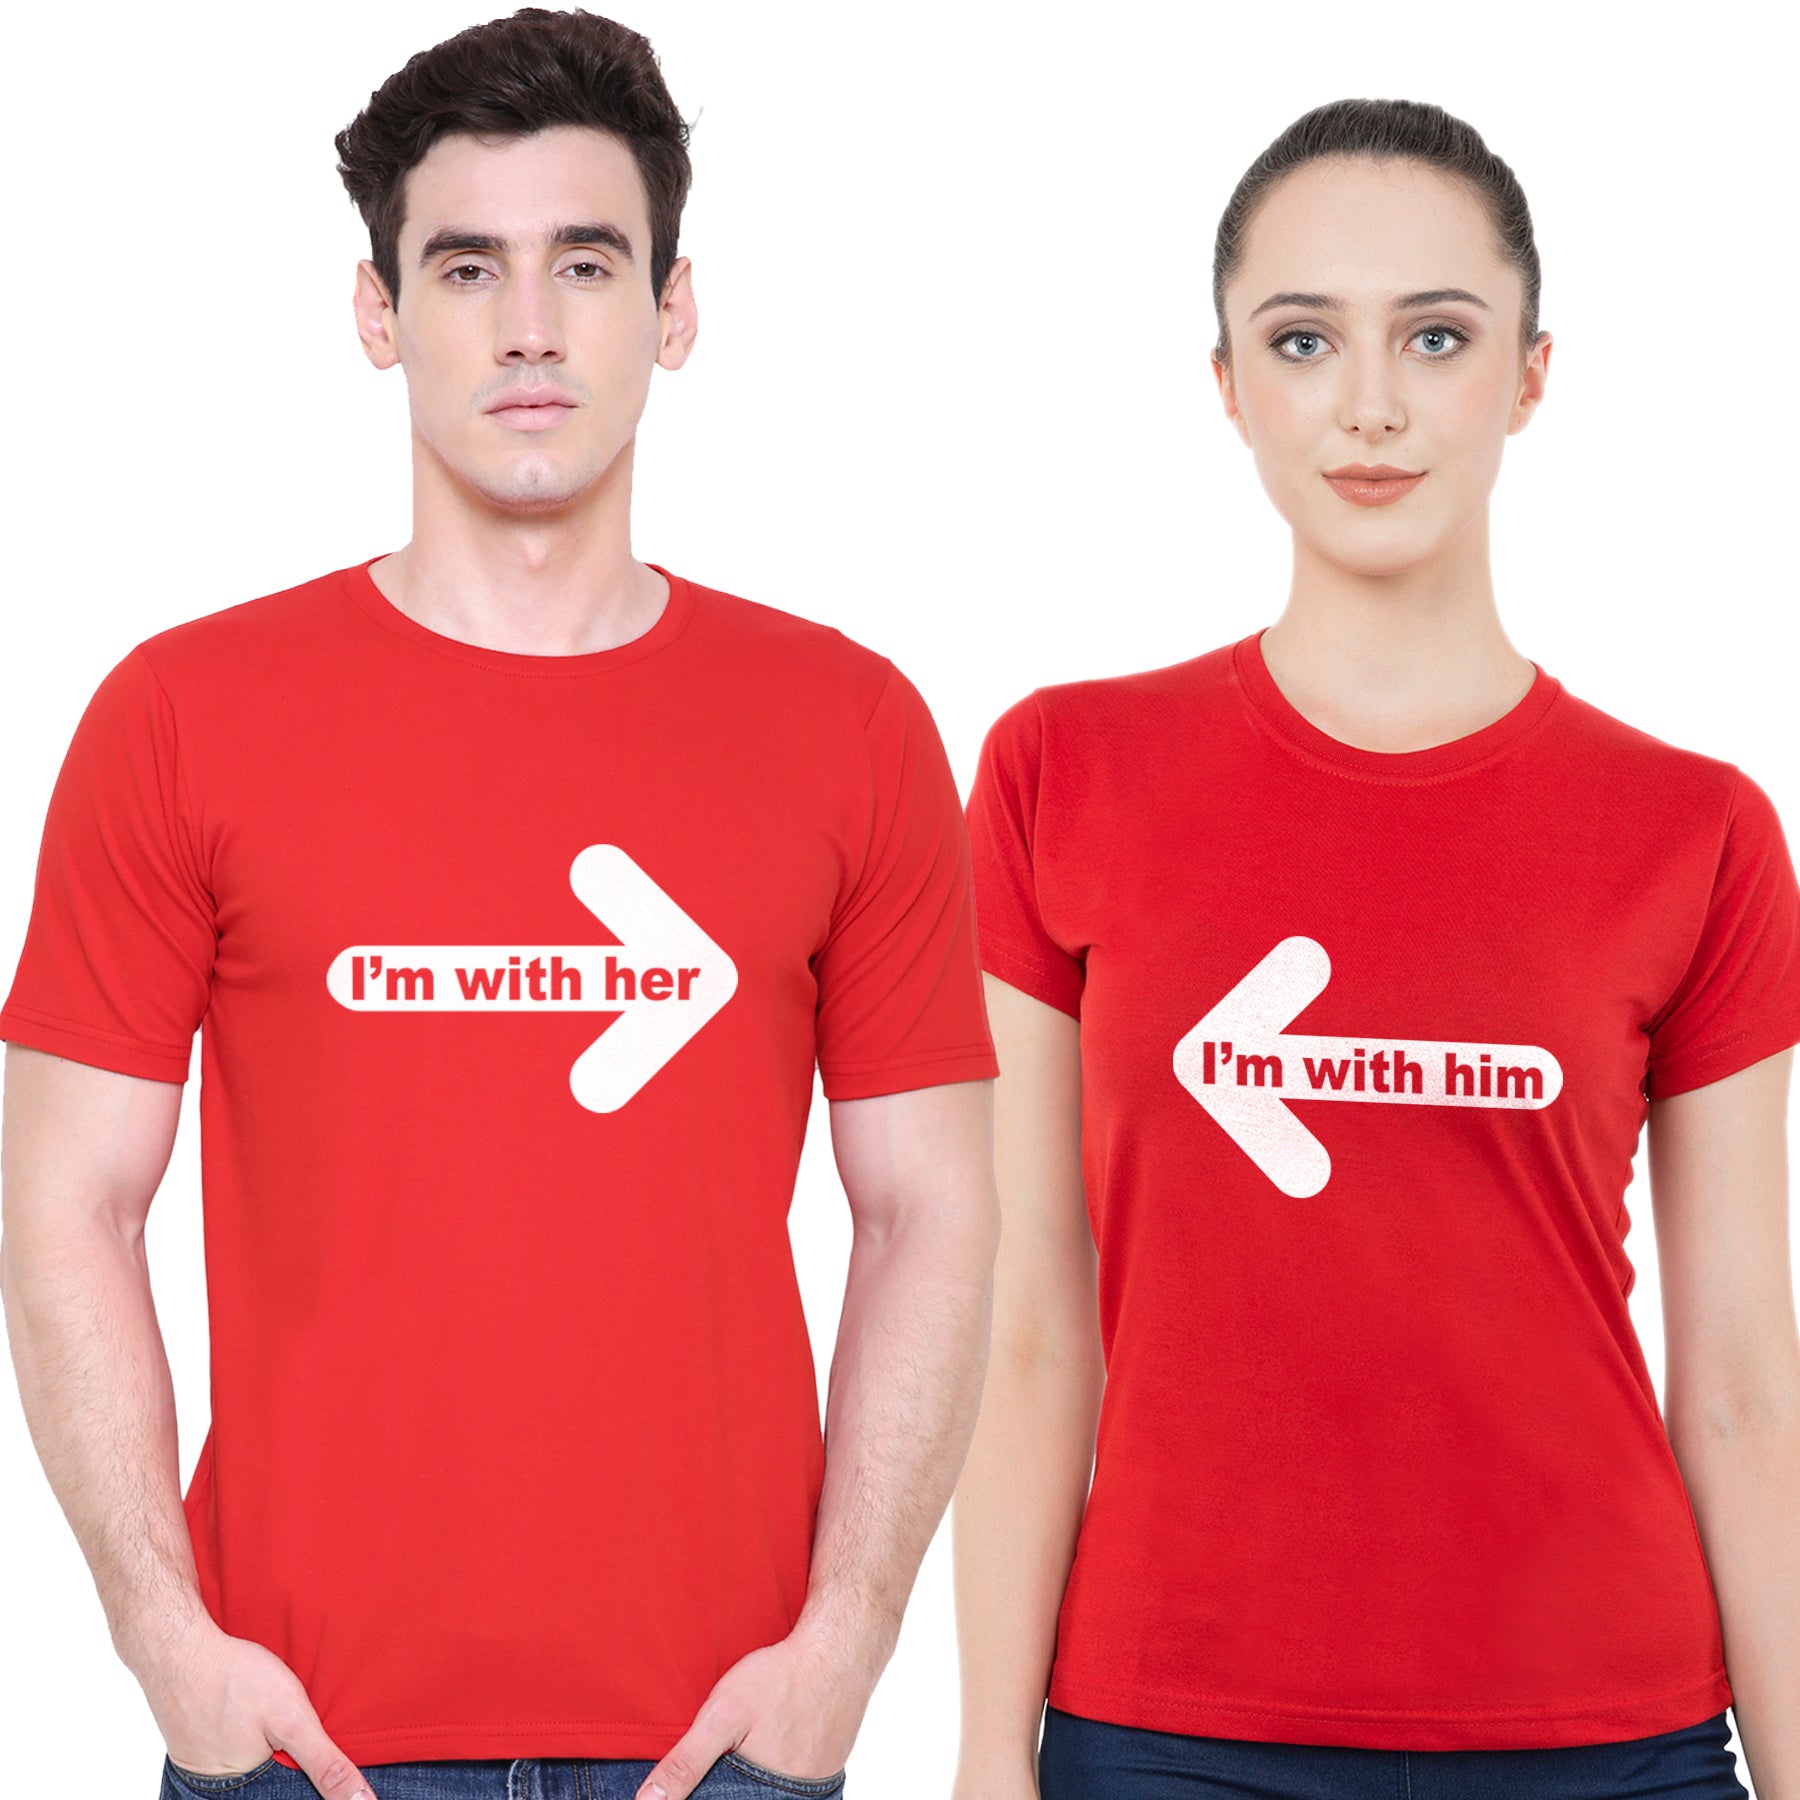 With him & hermatching Couple T shirts- Red